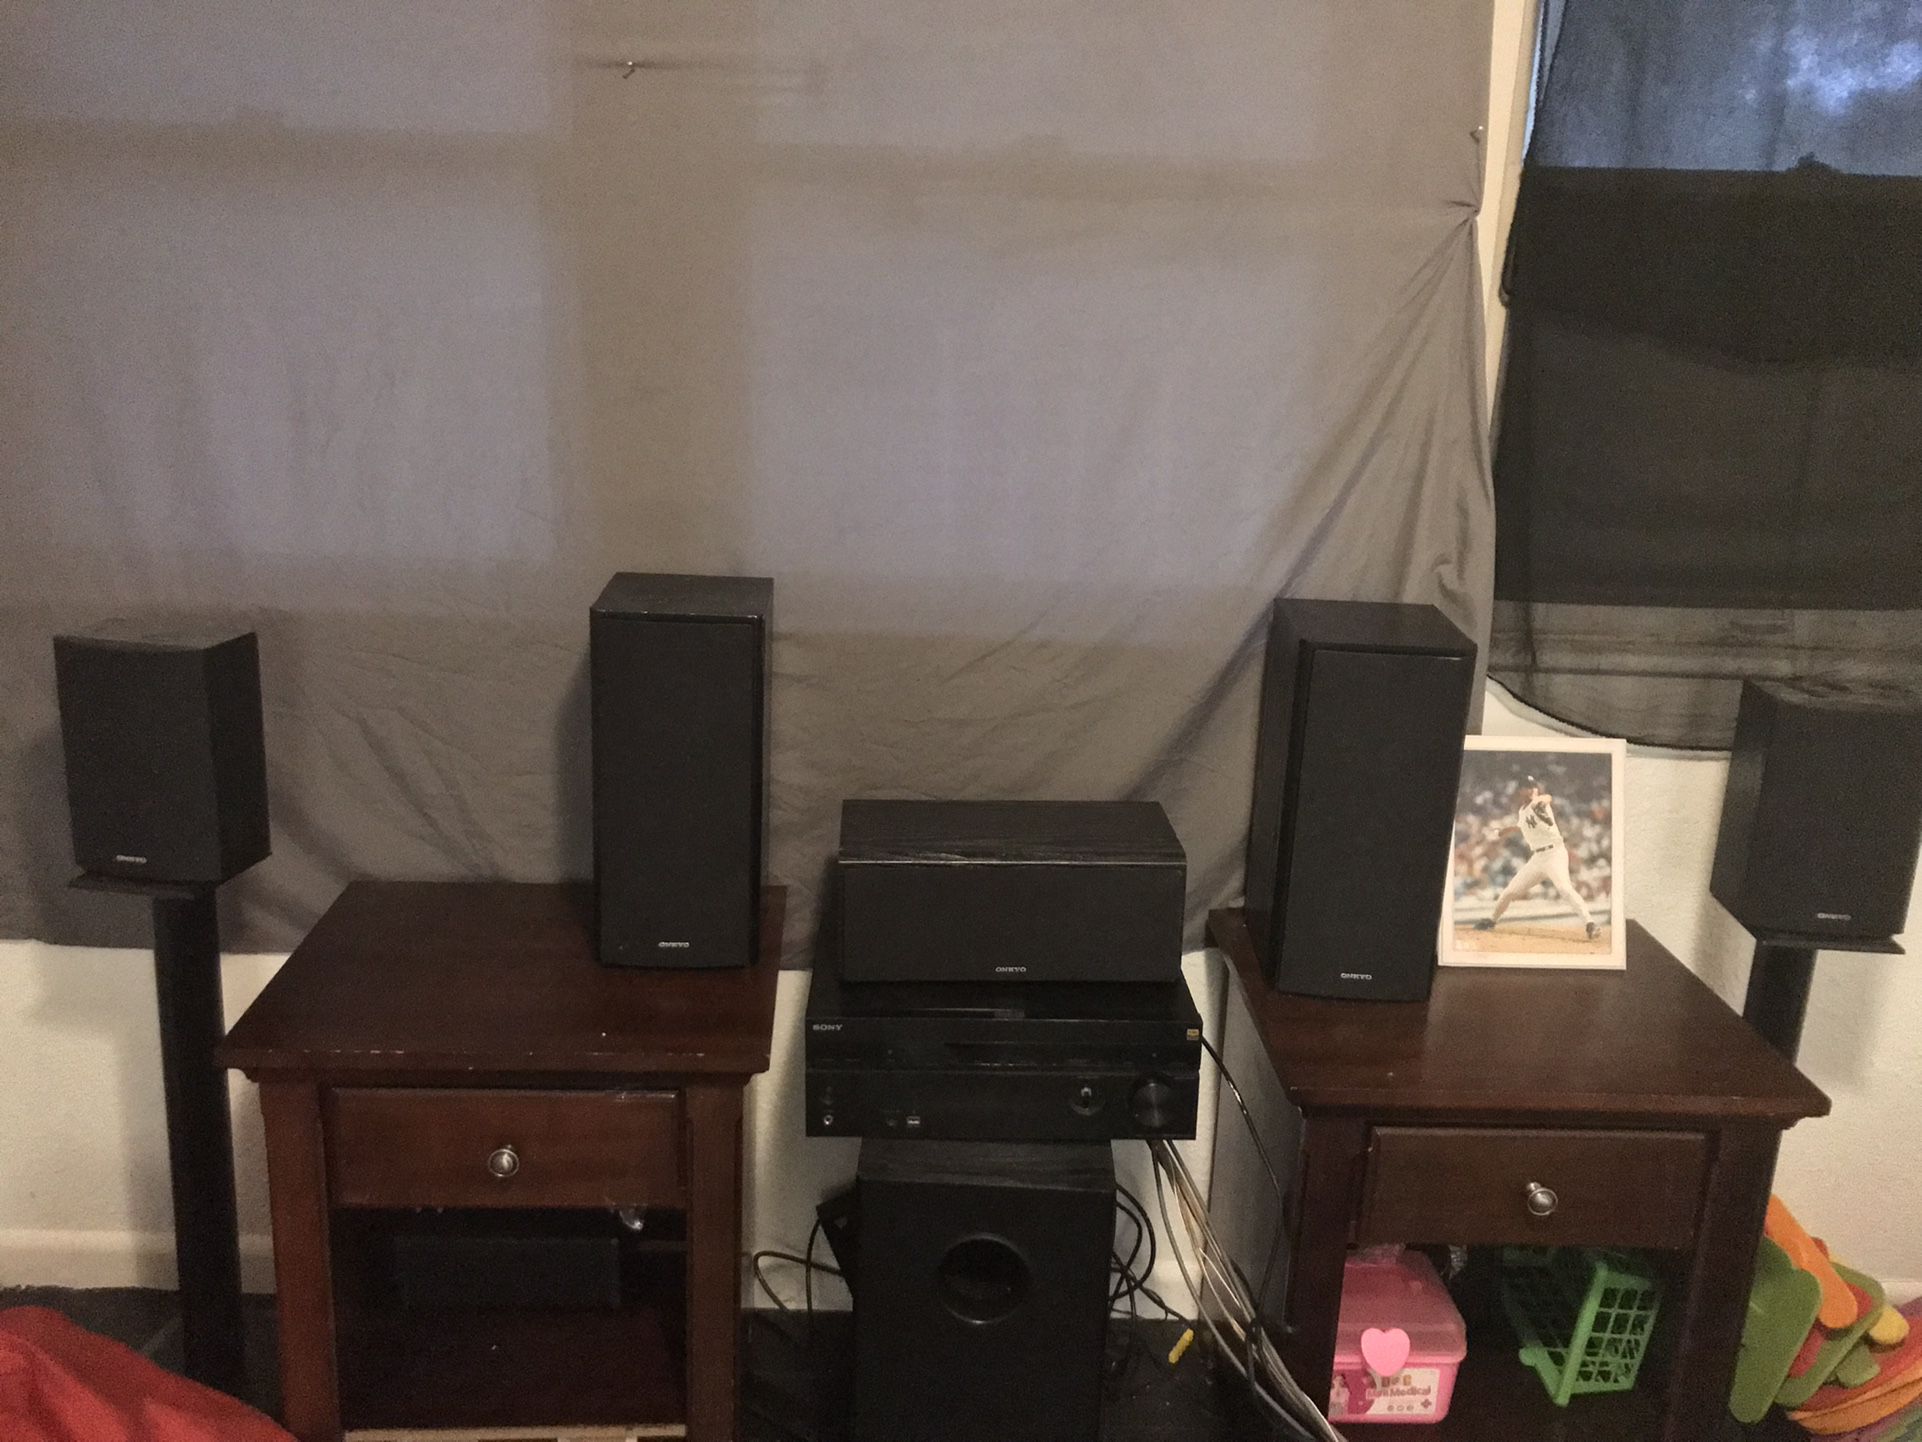 Onkyo Speakers With Sony Reciever